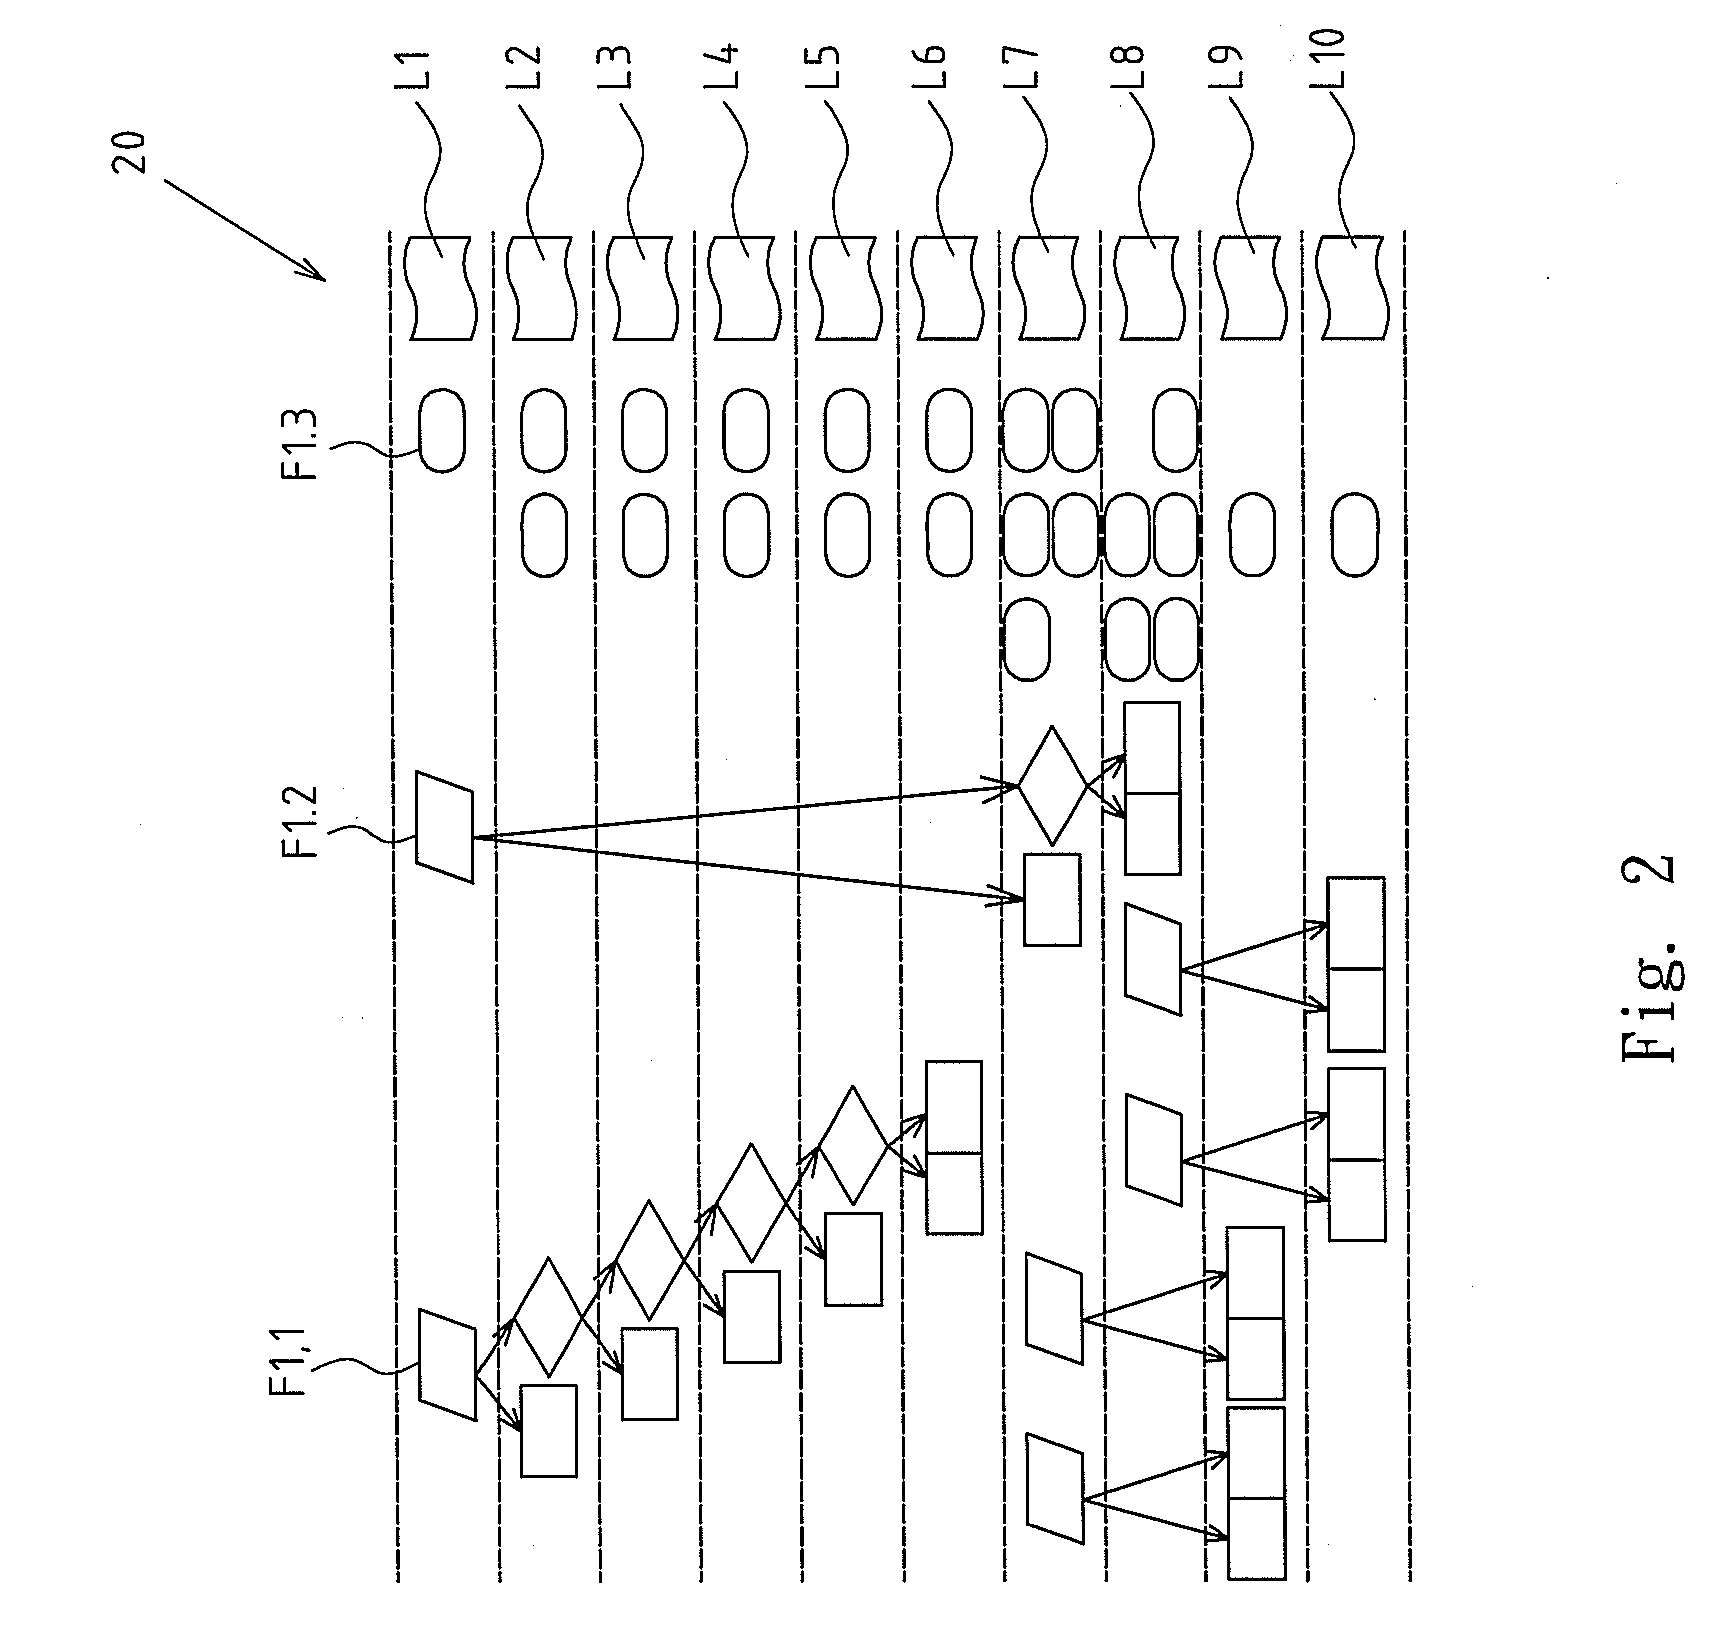 Method for constructing a decomposition data structure of multiple levels of detail design feature of 3D cad model and streaming thereof